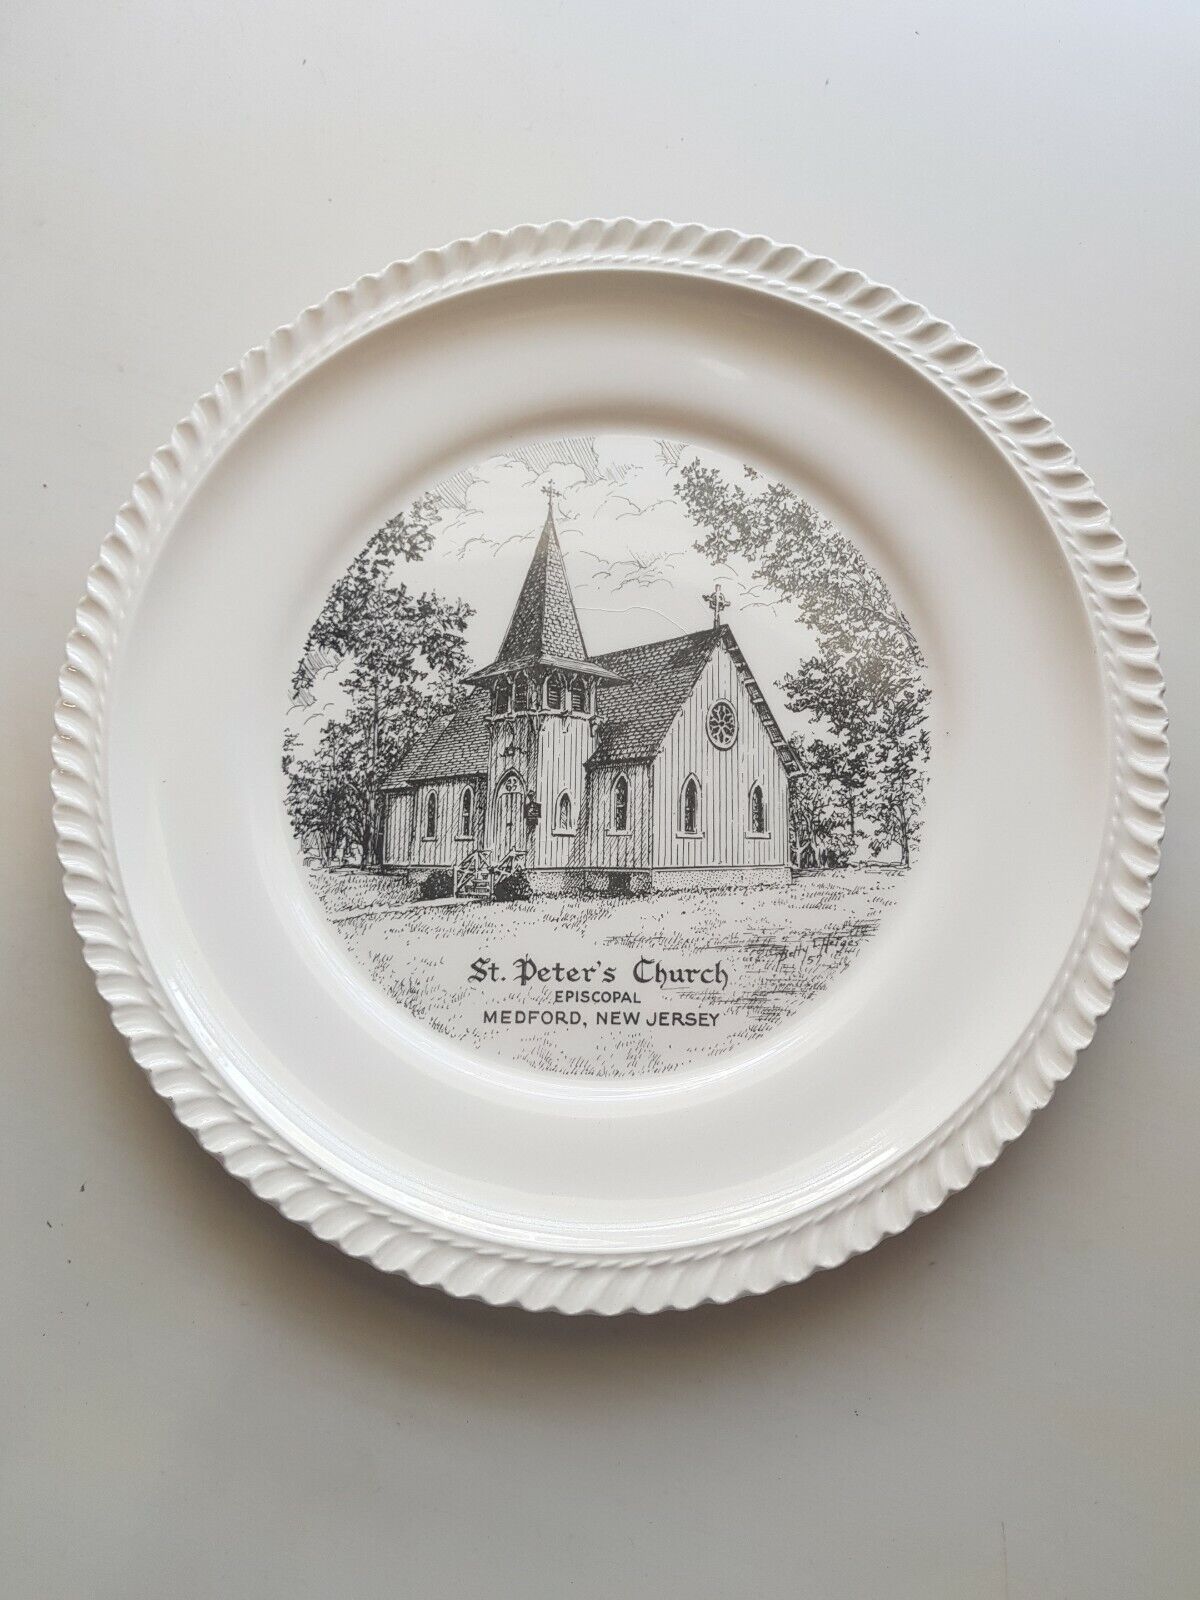 St. Peter's Episcopal Church Medford New Jersey Limited Edition 1957 Plate